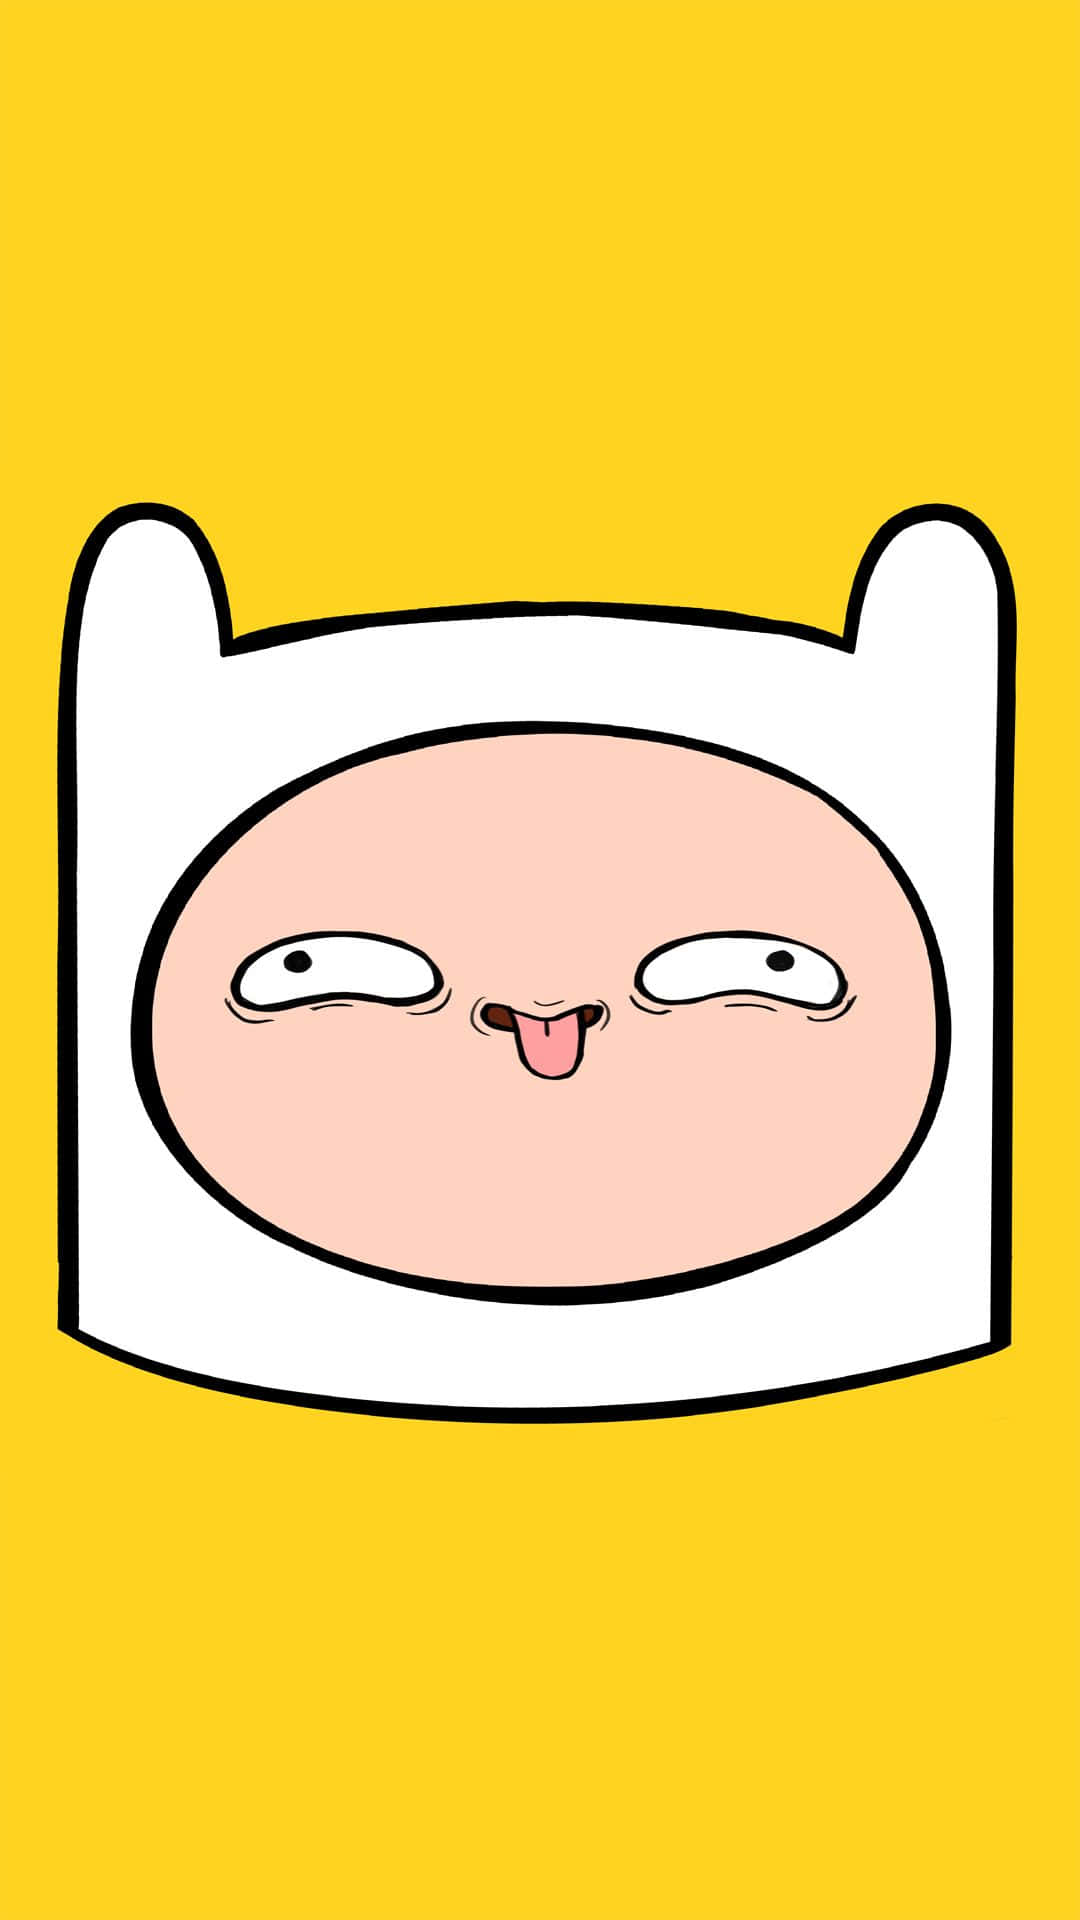 Always Be Ready for Your Next Adventure with the Adventure Time Iphone Wallpaper